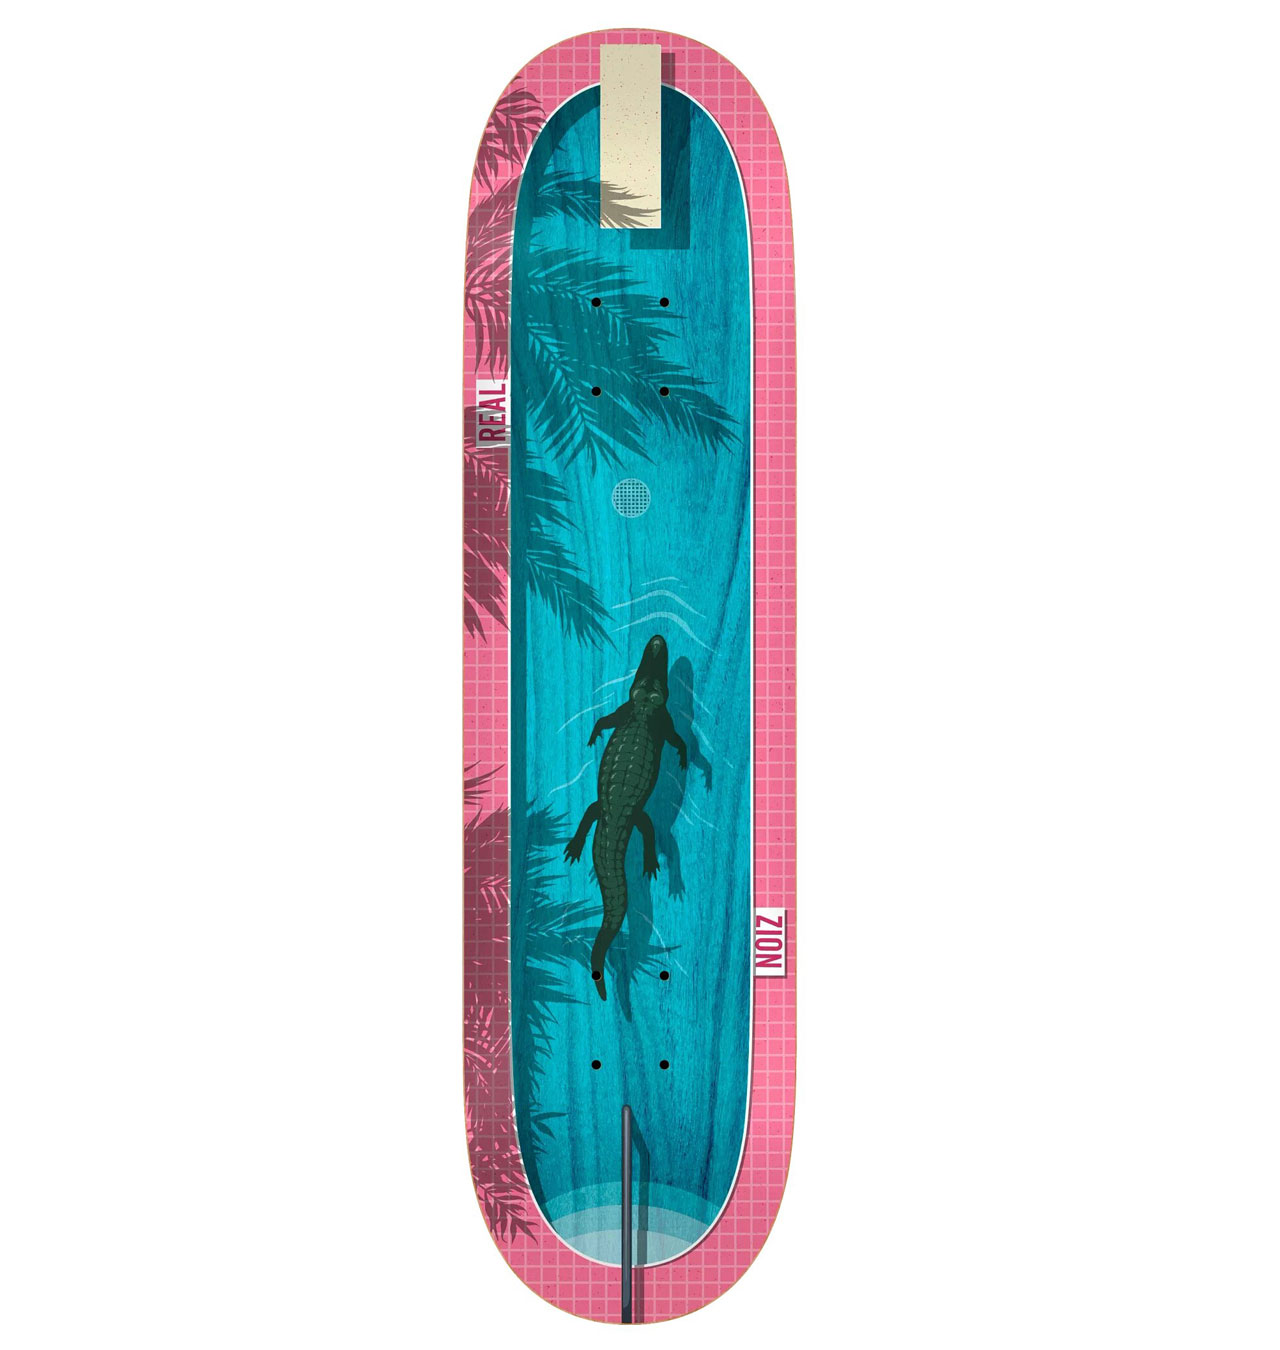 Real---Zion-Dive-In-Skateboard-Deck---8.50